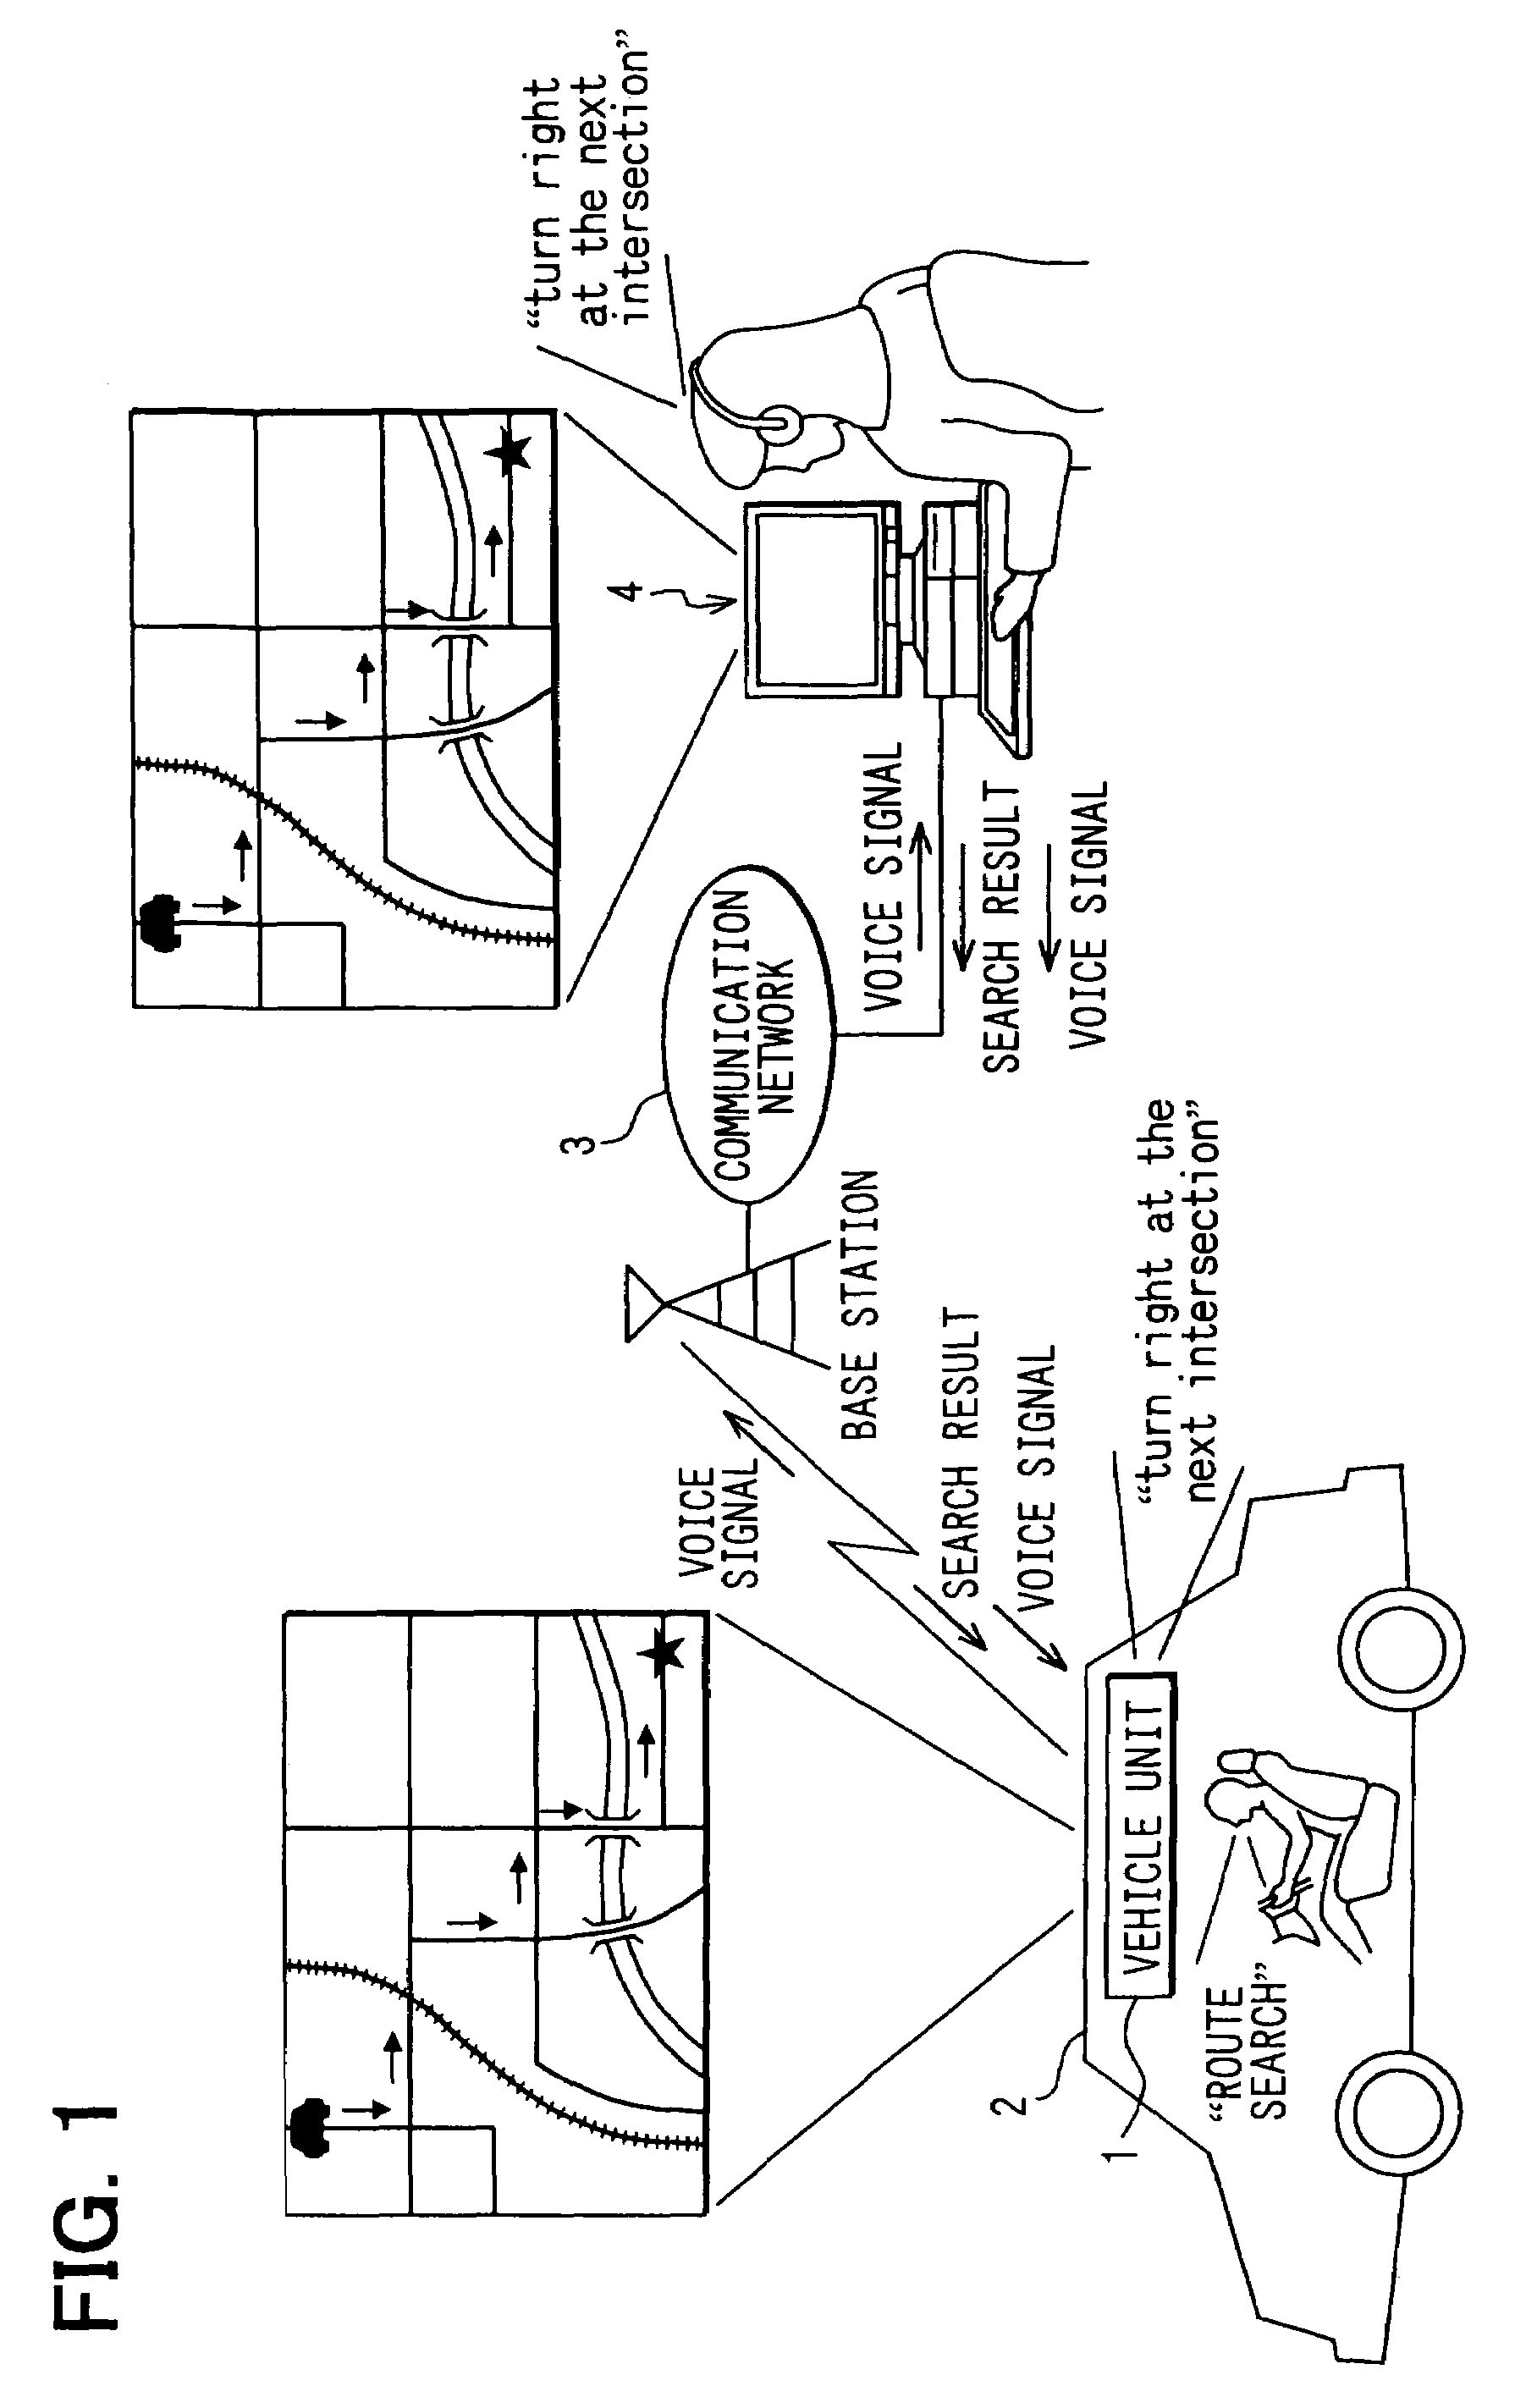 Adjusting sound characteristic of a communication network using test signal prior to providing communication to speech recognition server